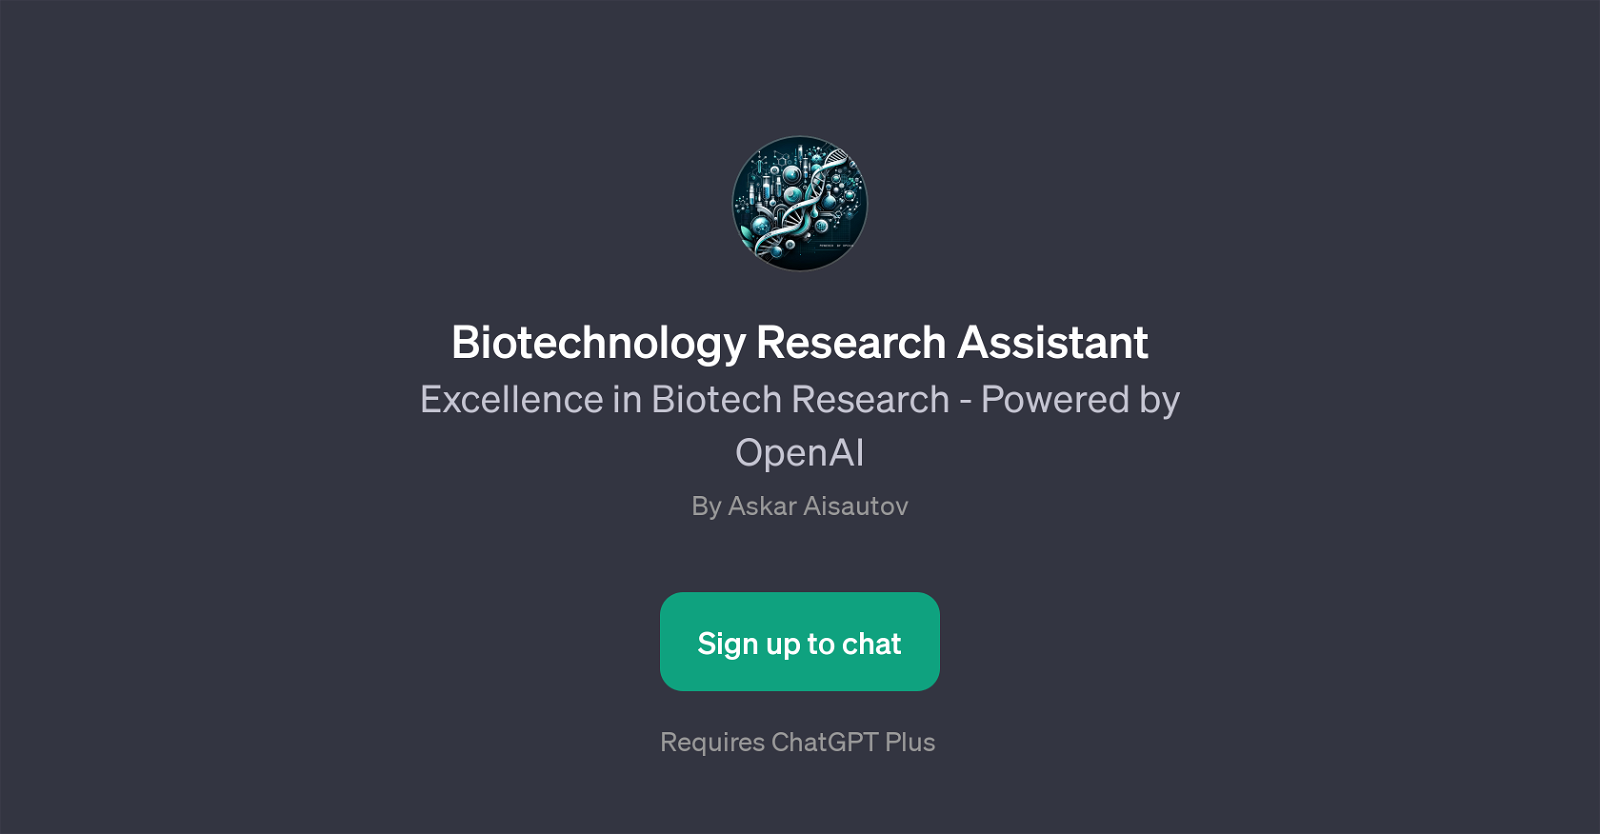 Biotechnology Research Assistant website